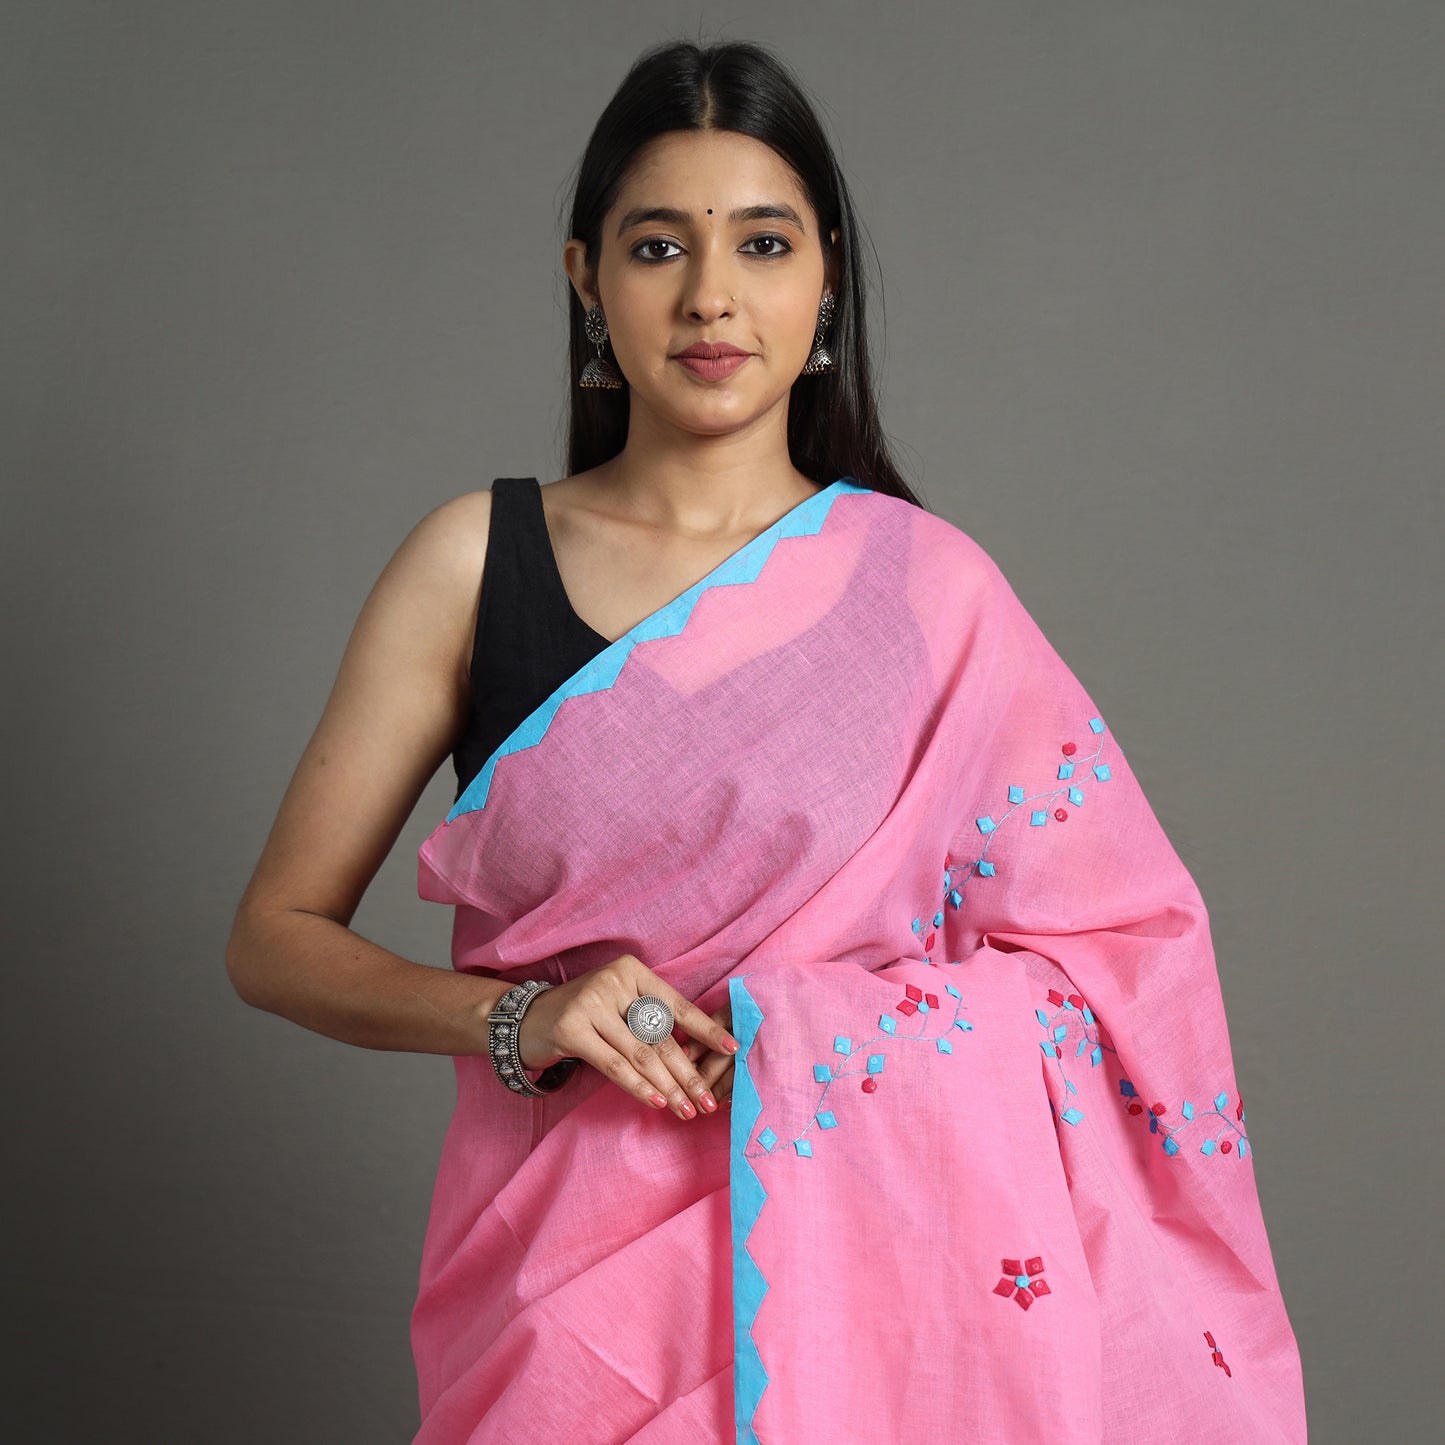 Pink - Applique Patti Kaam Pure Cotton Saree from Rampur 04